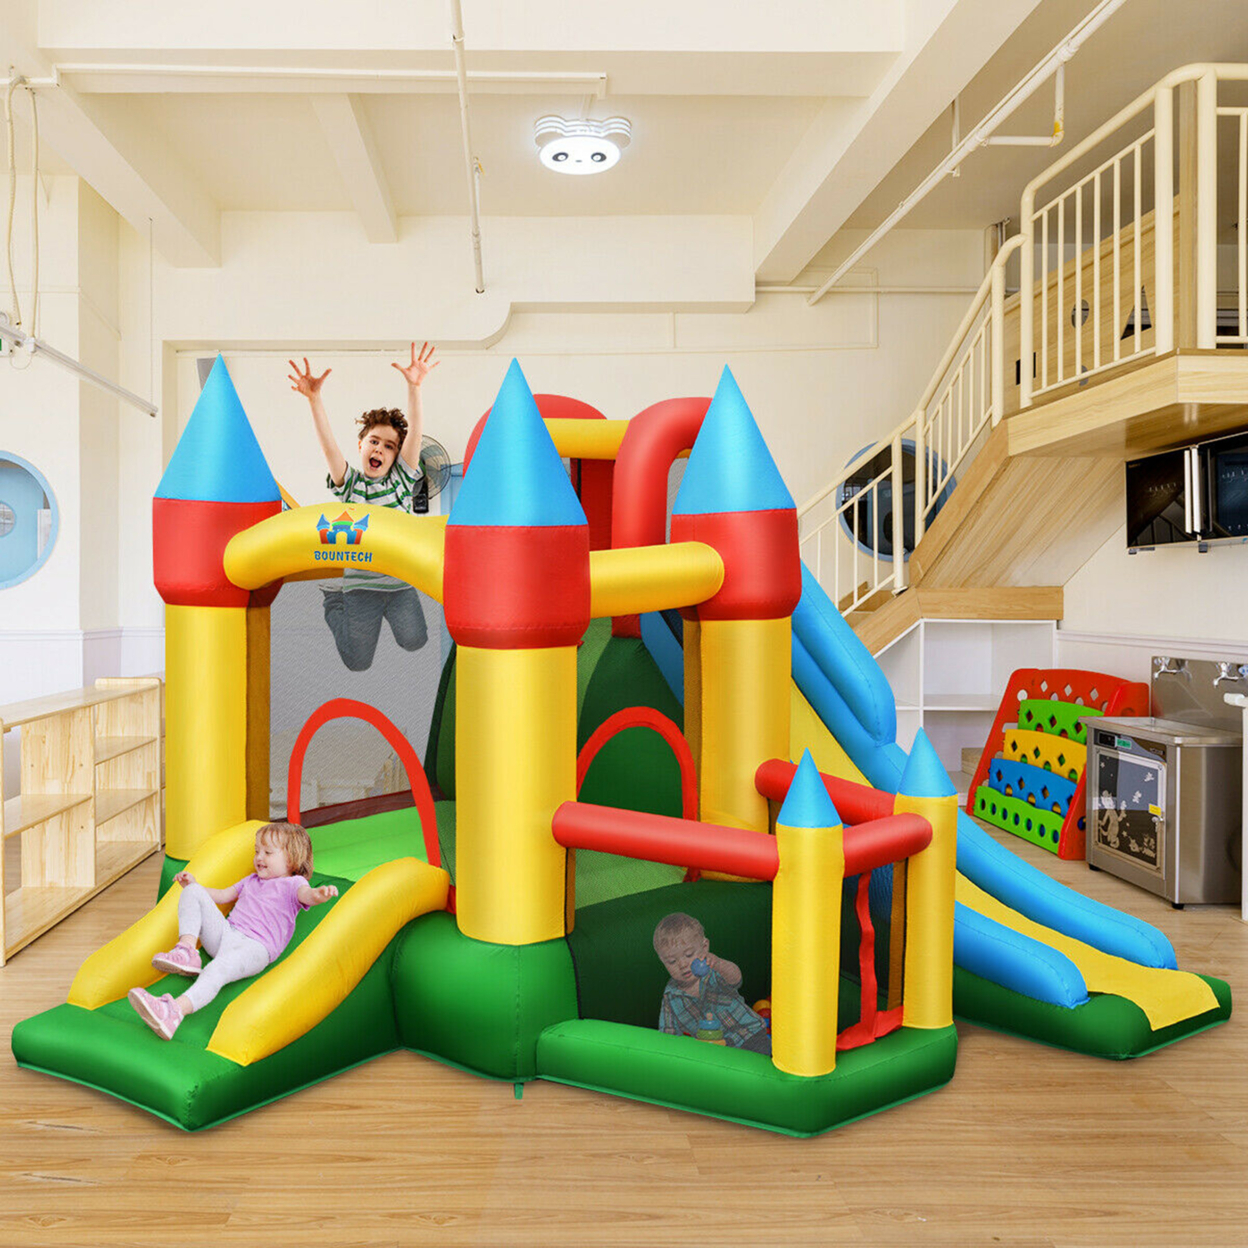 Kids Inflatable Bounce House Jumping Dual Slide Bouncer Castle W/ 780W Blower